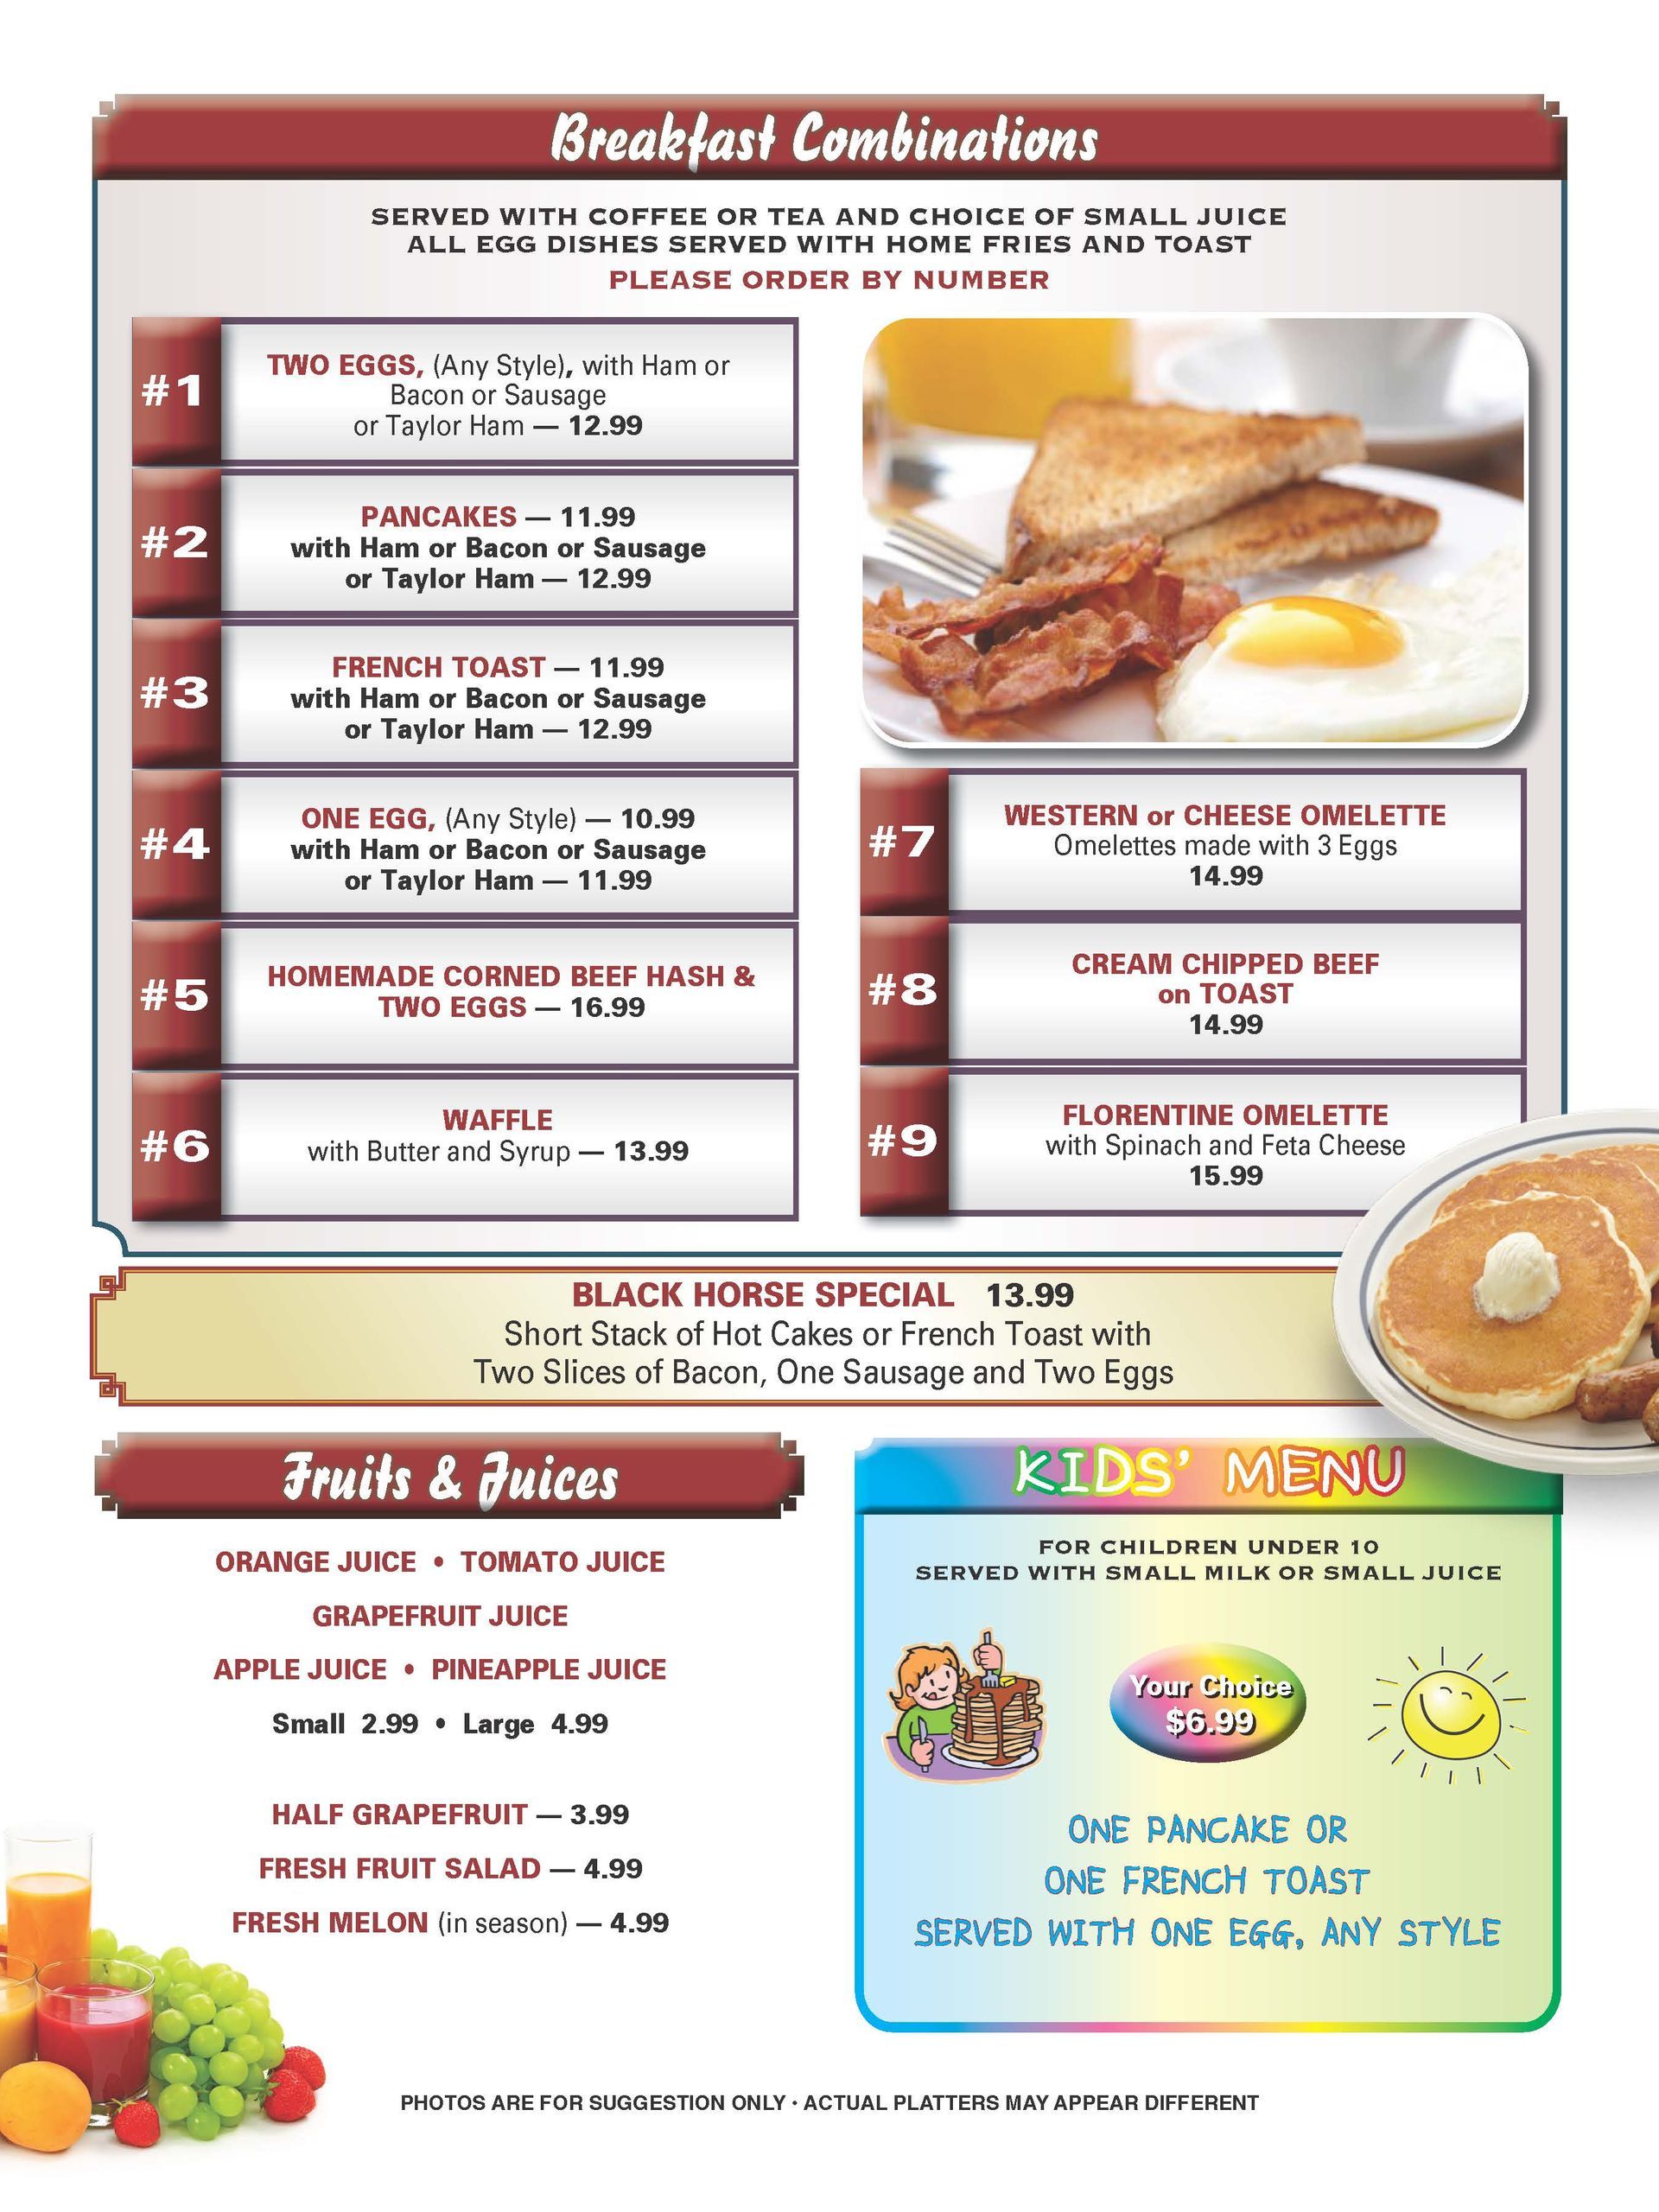 a menu for a restaurant shows breakfast combinations and fruits and juices — The Black Horse Breakfast in Ephraim, NJ